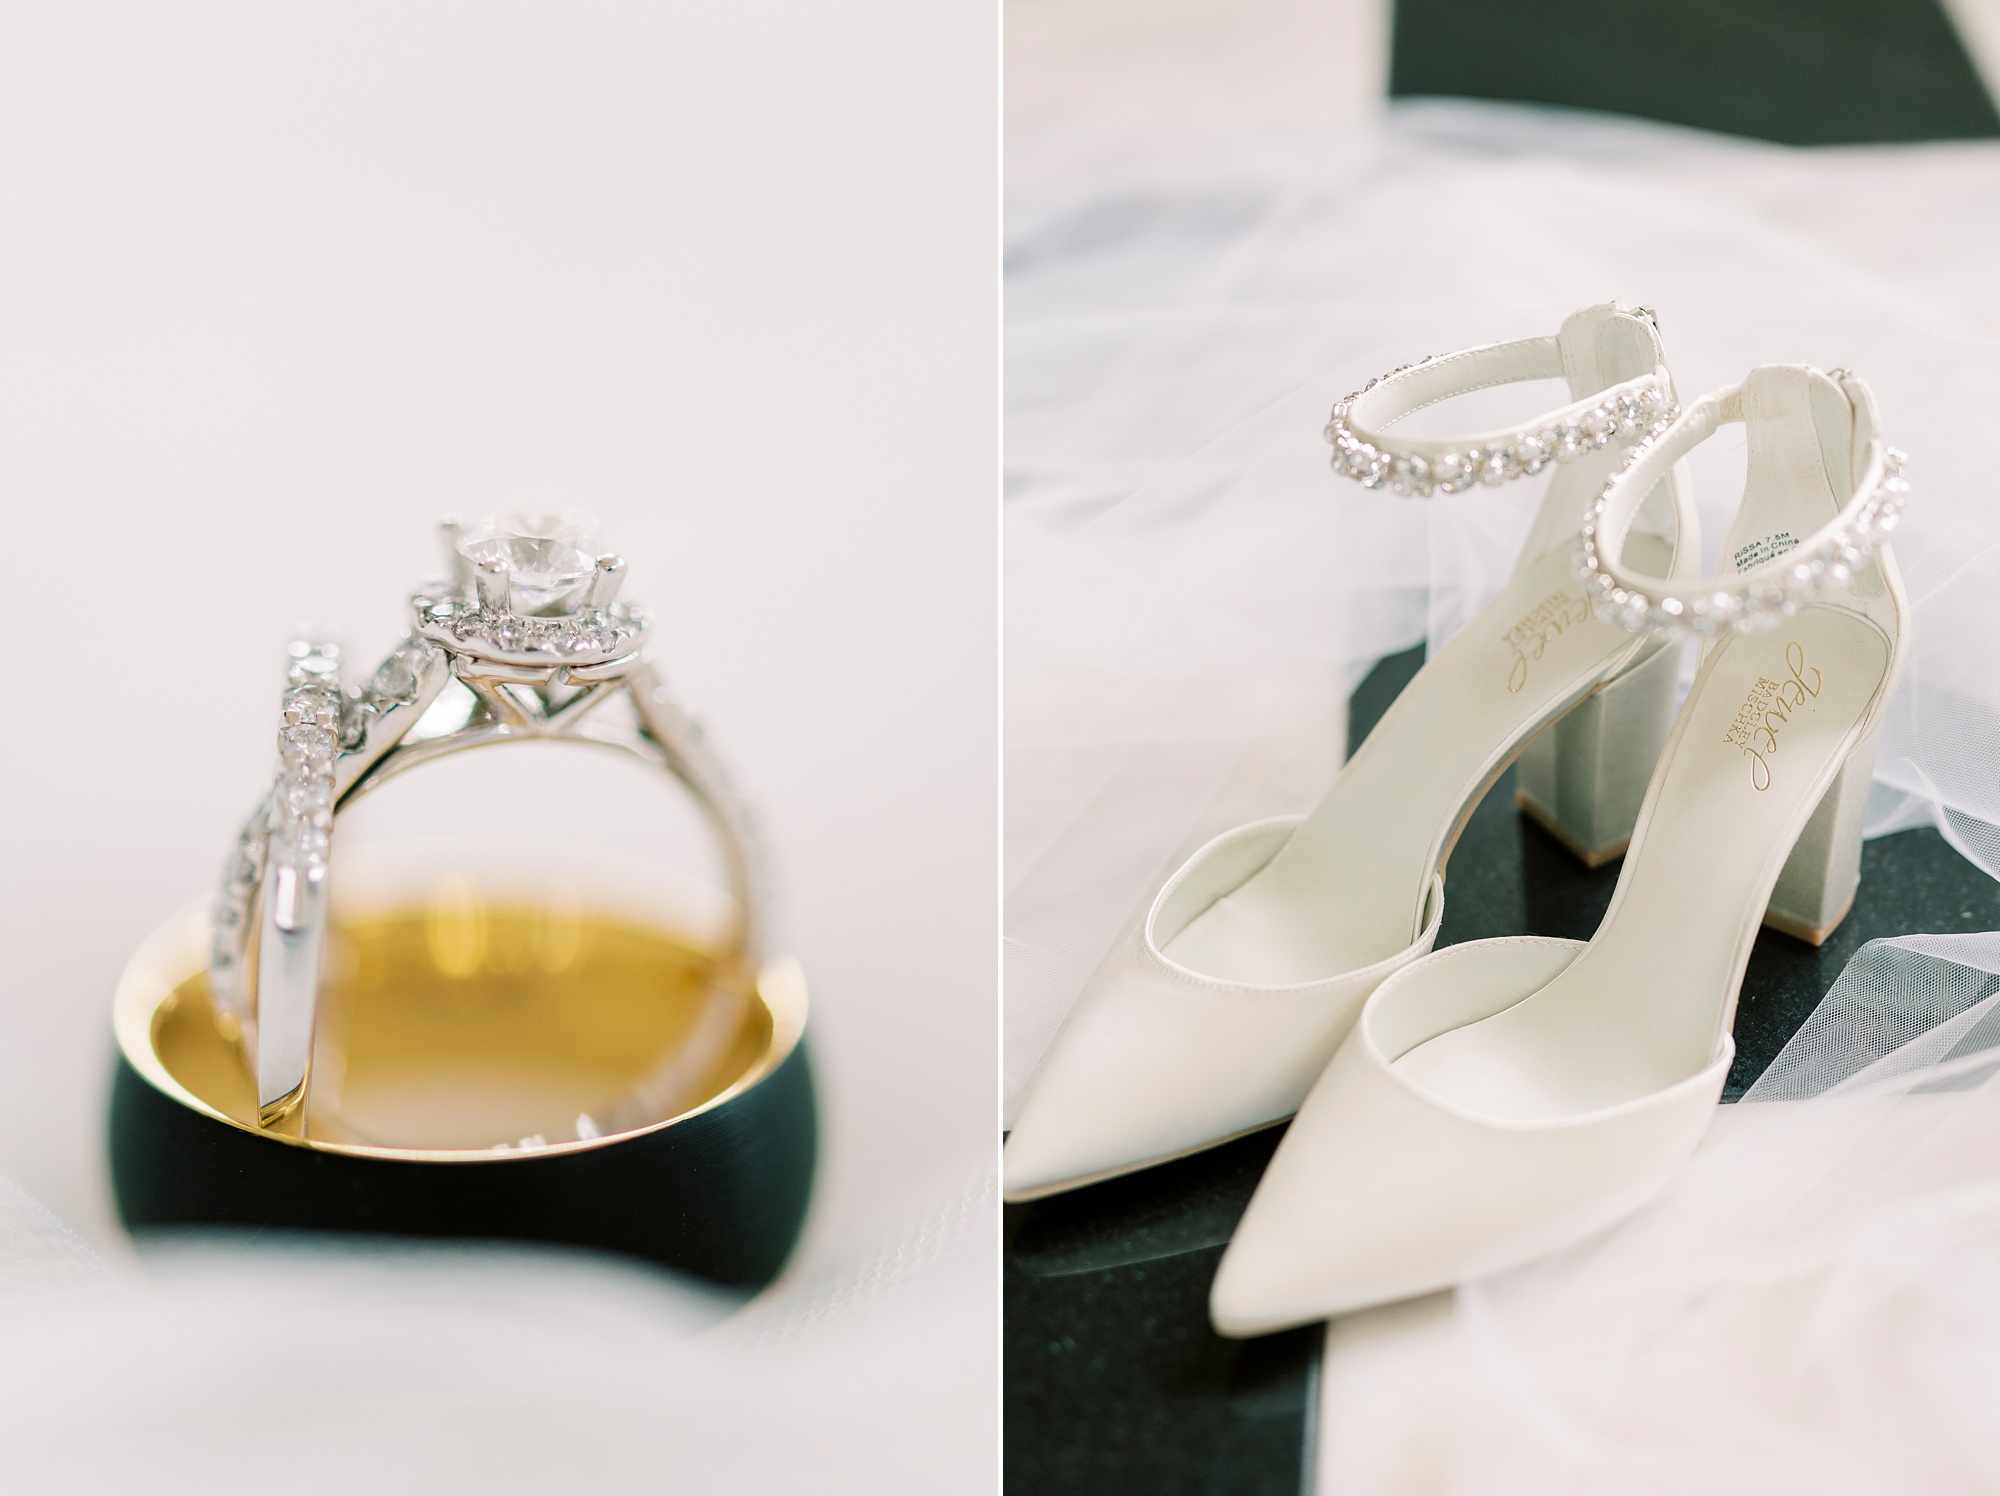 wedding rings sit together next to bride's ivory shoes